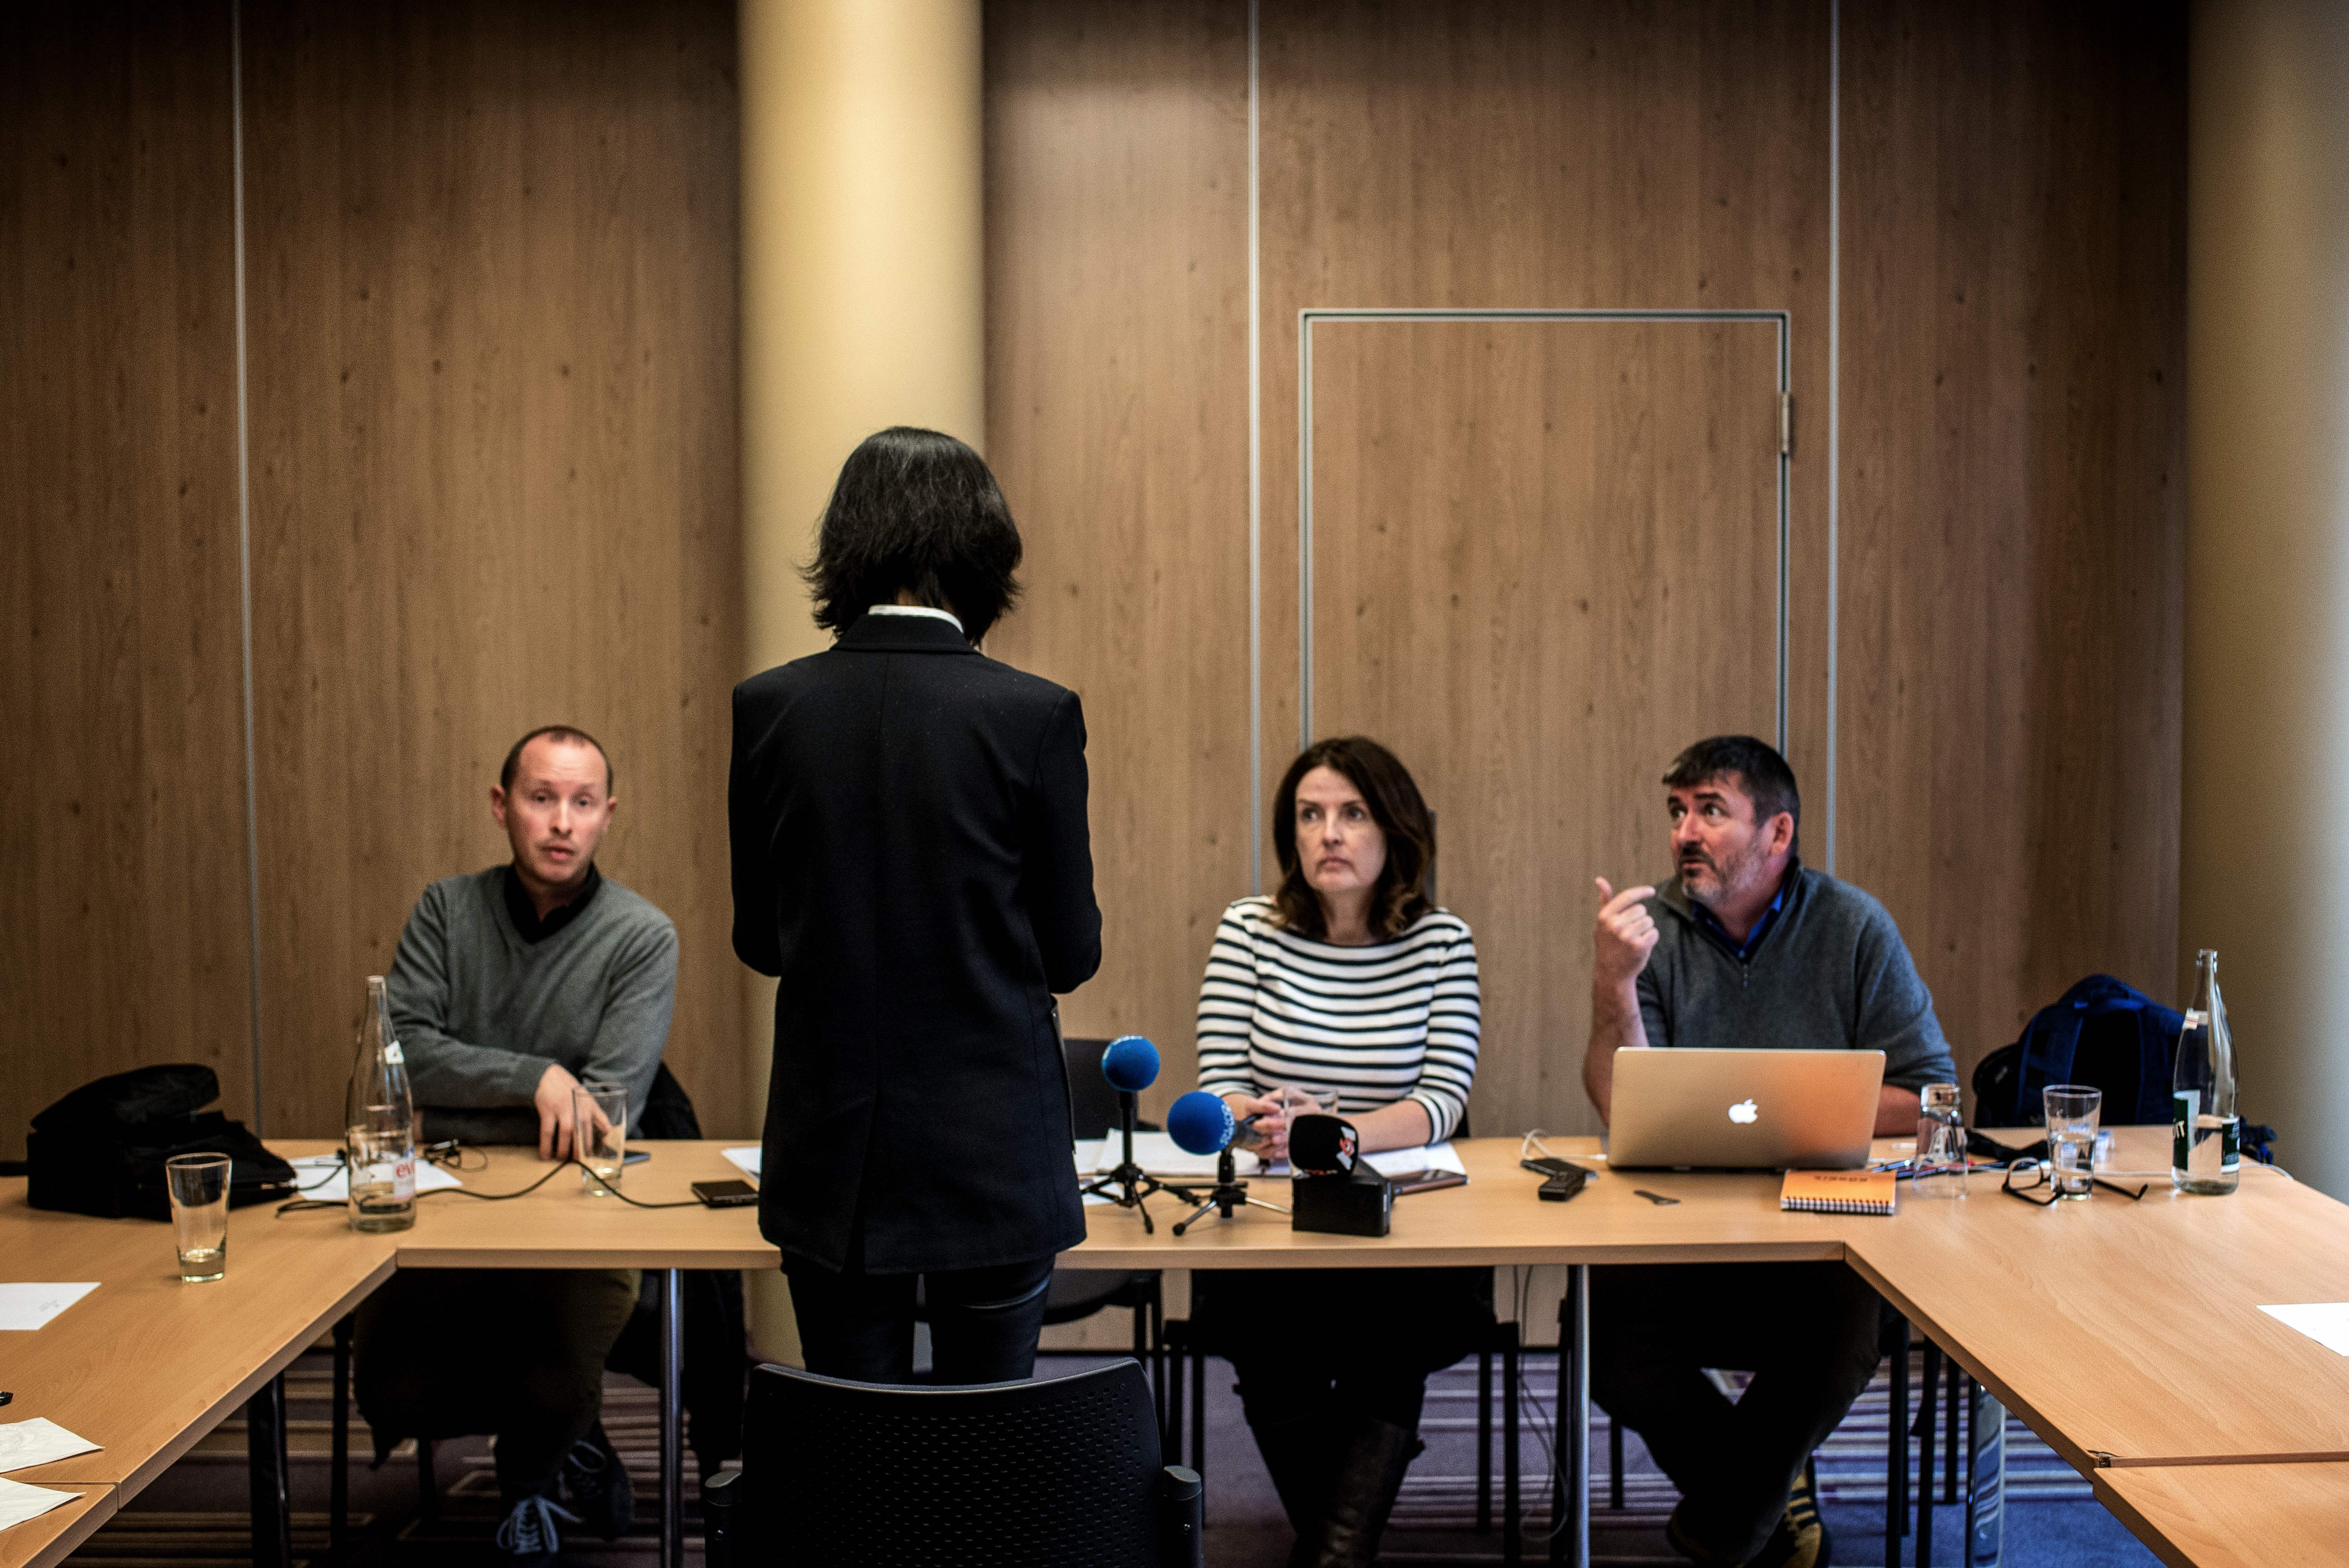 Grace, the wife of the missing Interpol president Meng Hongwey, talks to journalists on October 7, 2018 in Lyon during a press conference during which she did not want her face to be shown, a day after Interpol demanded an official "clarification" from China on the whereabouts of its missing police chief, after reports said he was detained for questioning on arrival in his homeland. - Beijing has remained silent over the mysterious disappearance of Meng Hongwei, who was last seen leaving for China in late September from the Interpol headquarters in Lyon, southeast France, a source close to the enquiry told AFP. (Photo by JEFF PACHOUD / AFP) 